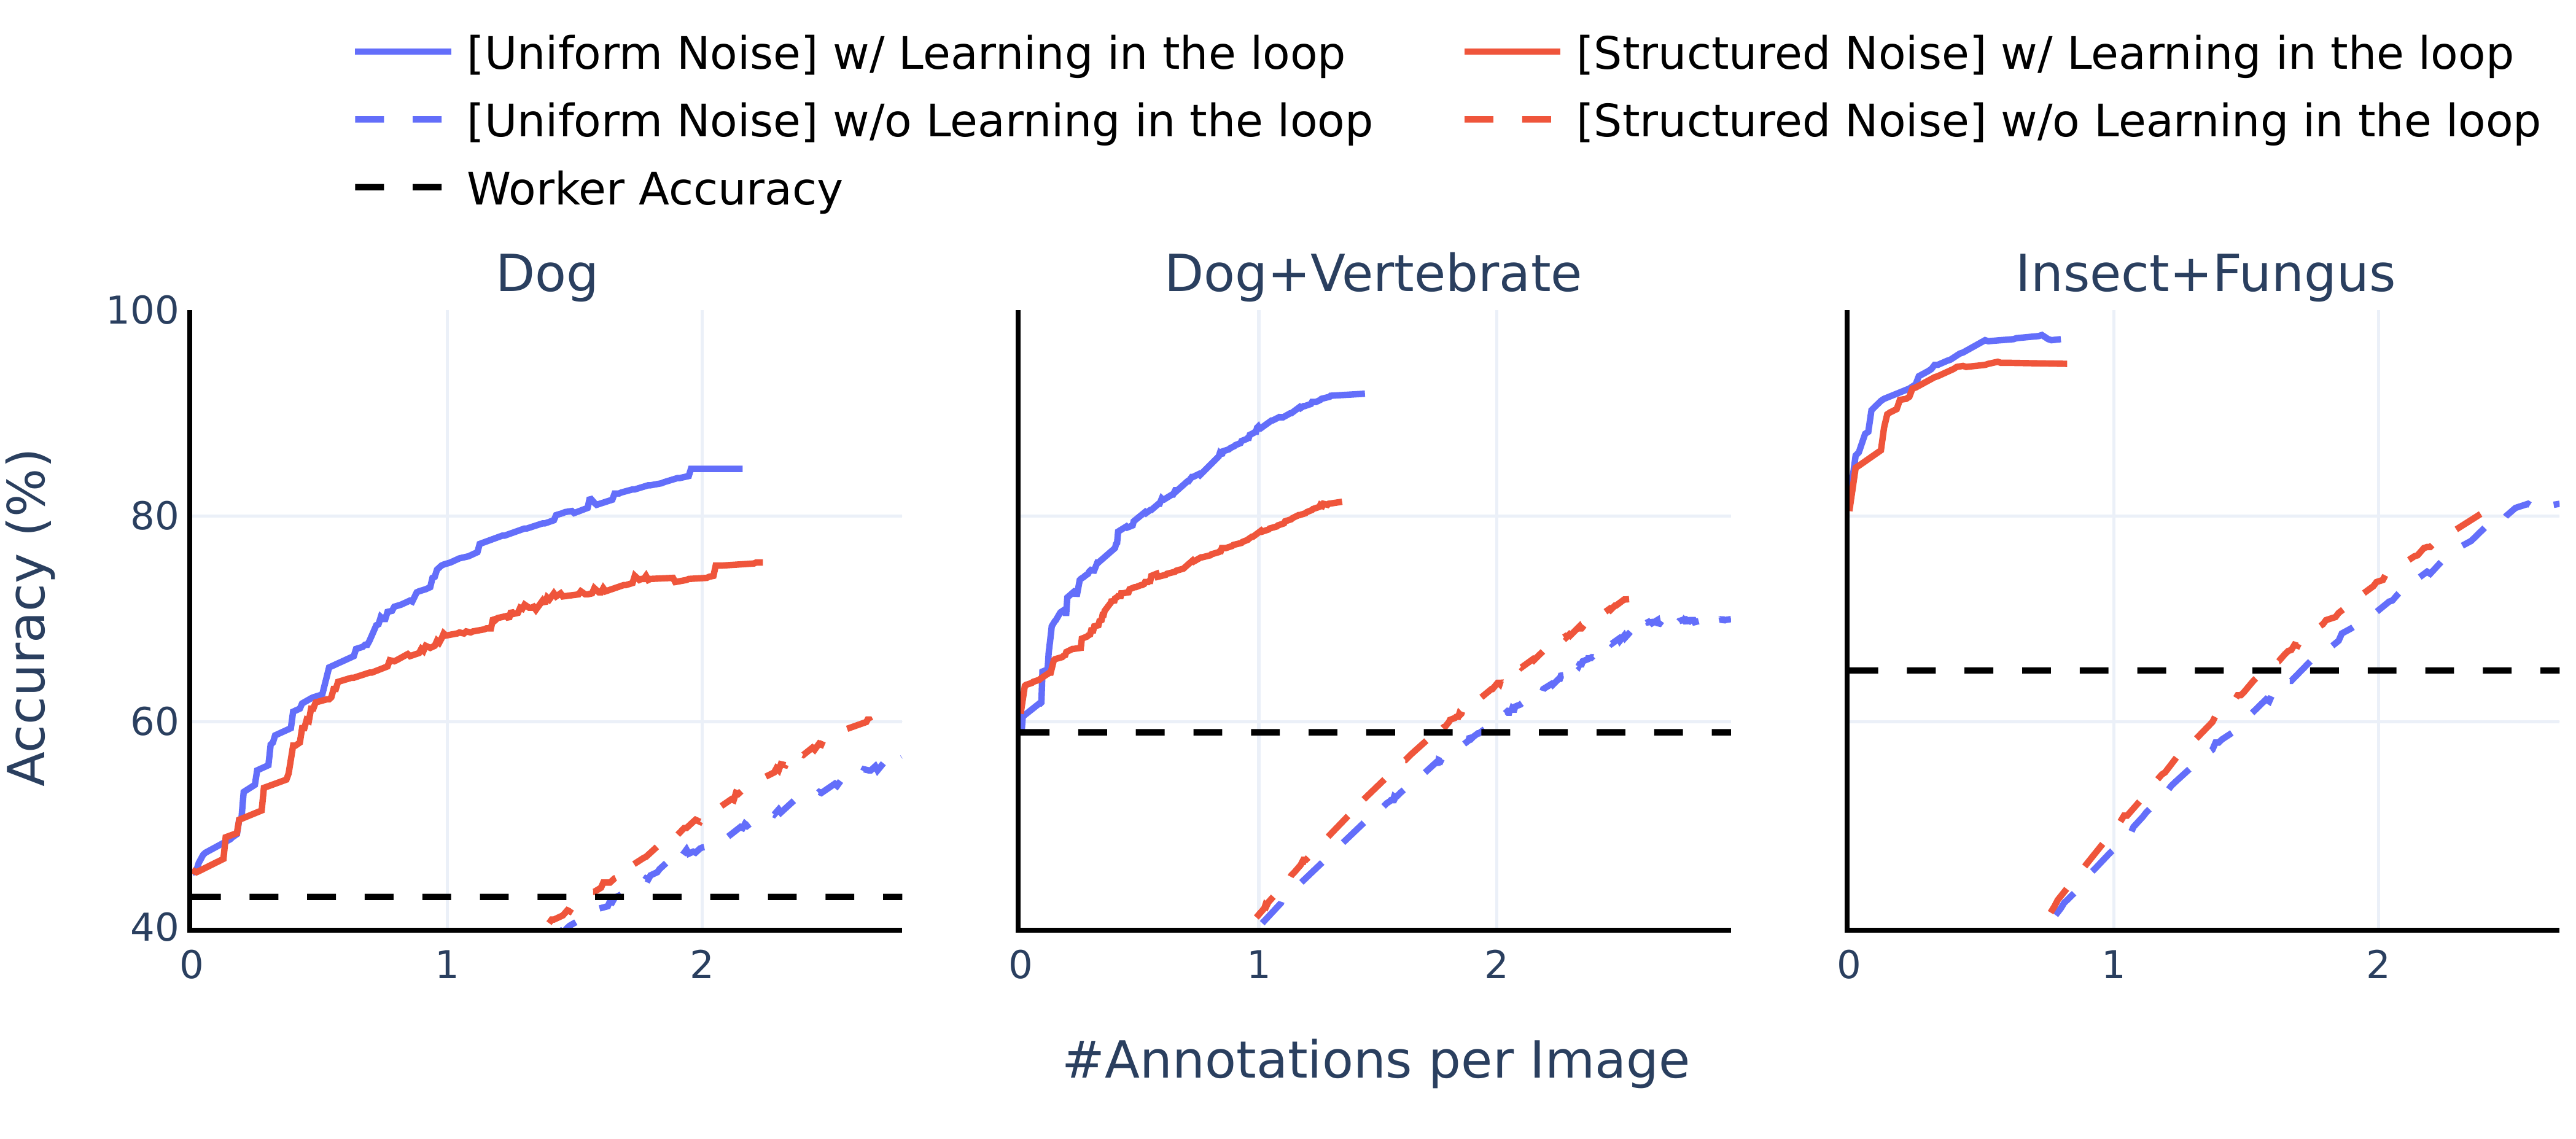 Over-optimistic results from workers with uniform noise. Human workers tend to make *structured* mistakes. Simulated workers with uniform label noise (blue) can result in over-optimistic annotation performance. Experiments under workers with structured noise reflect real-life performance better.